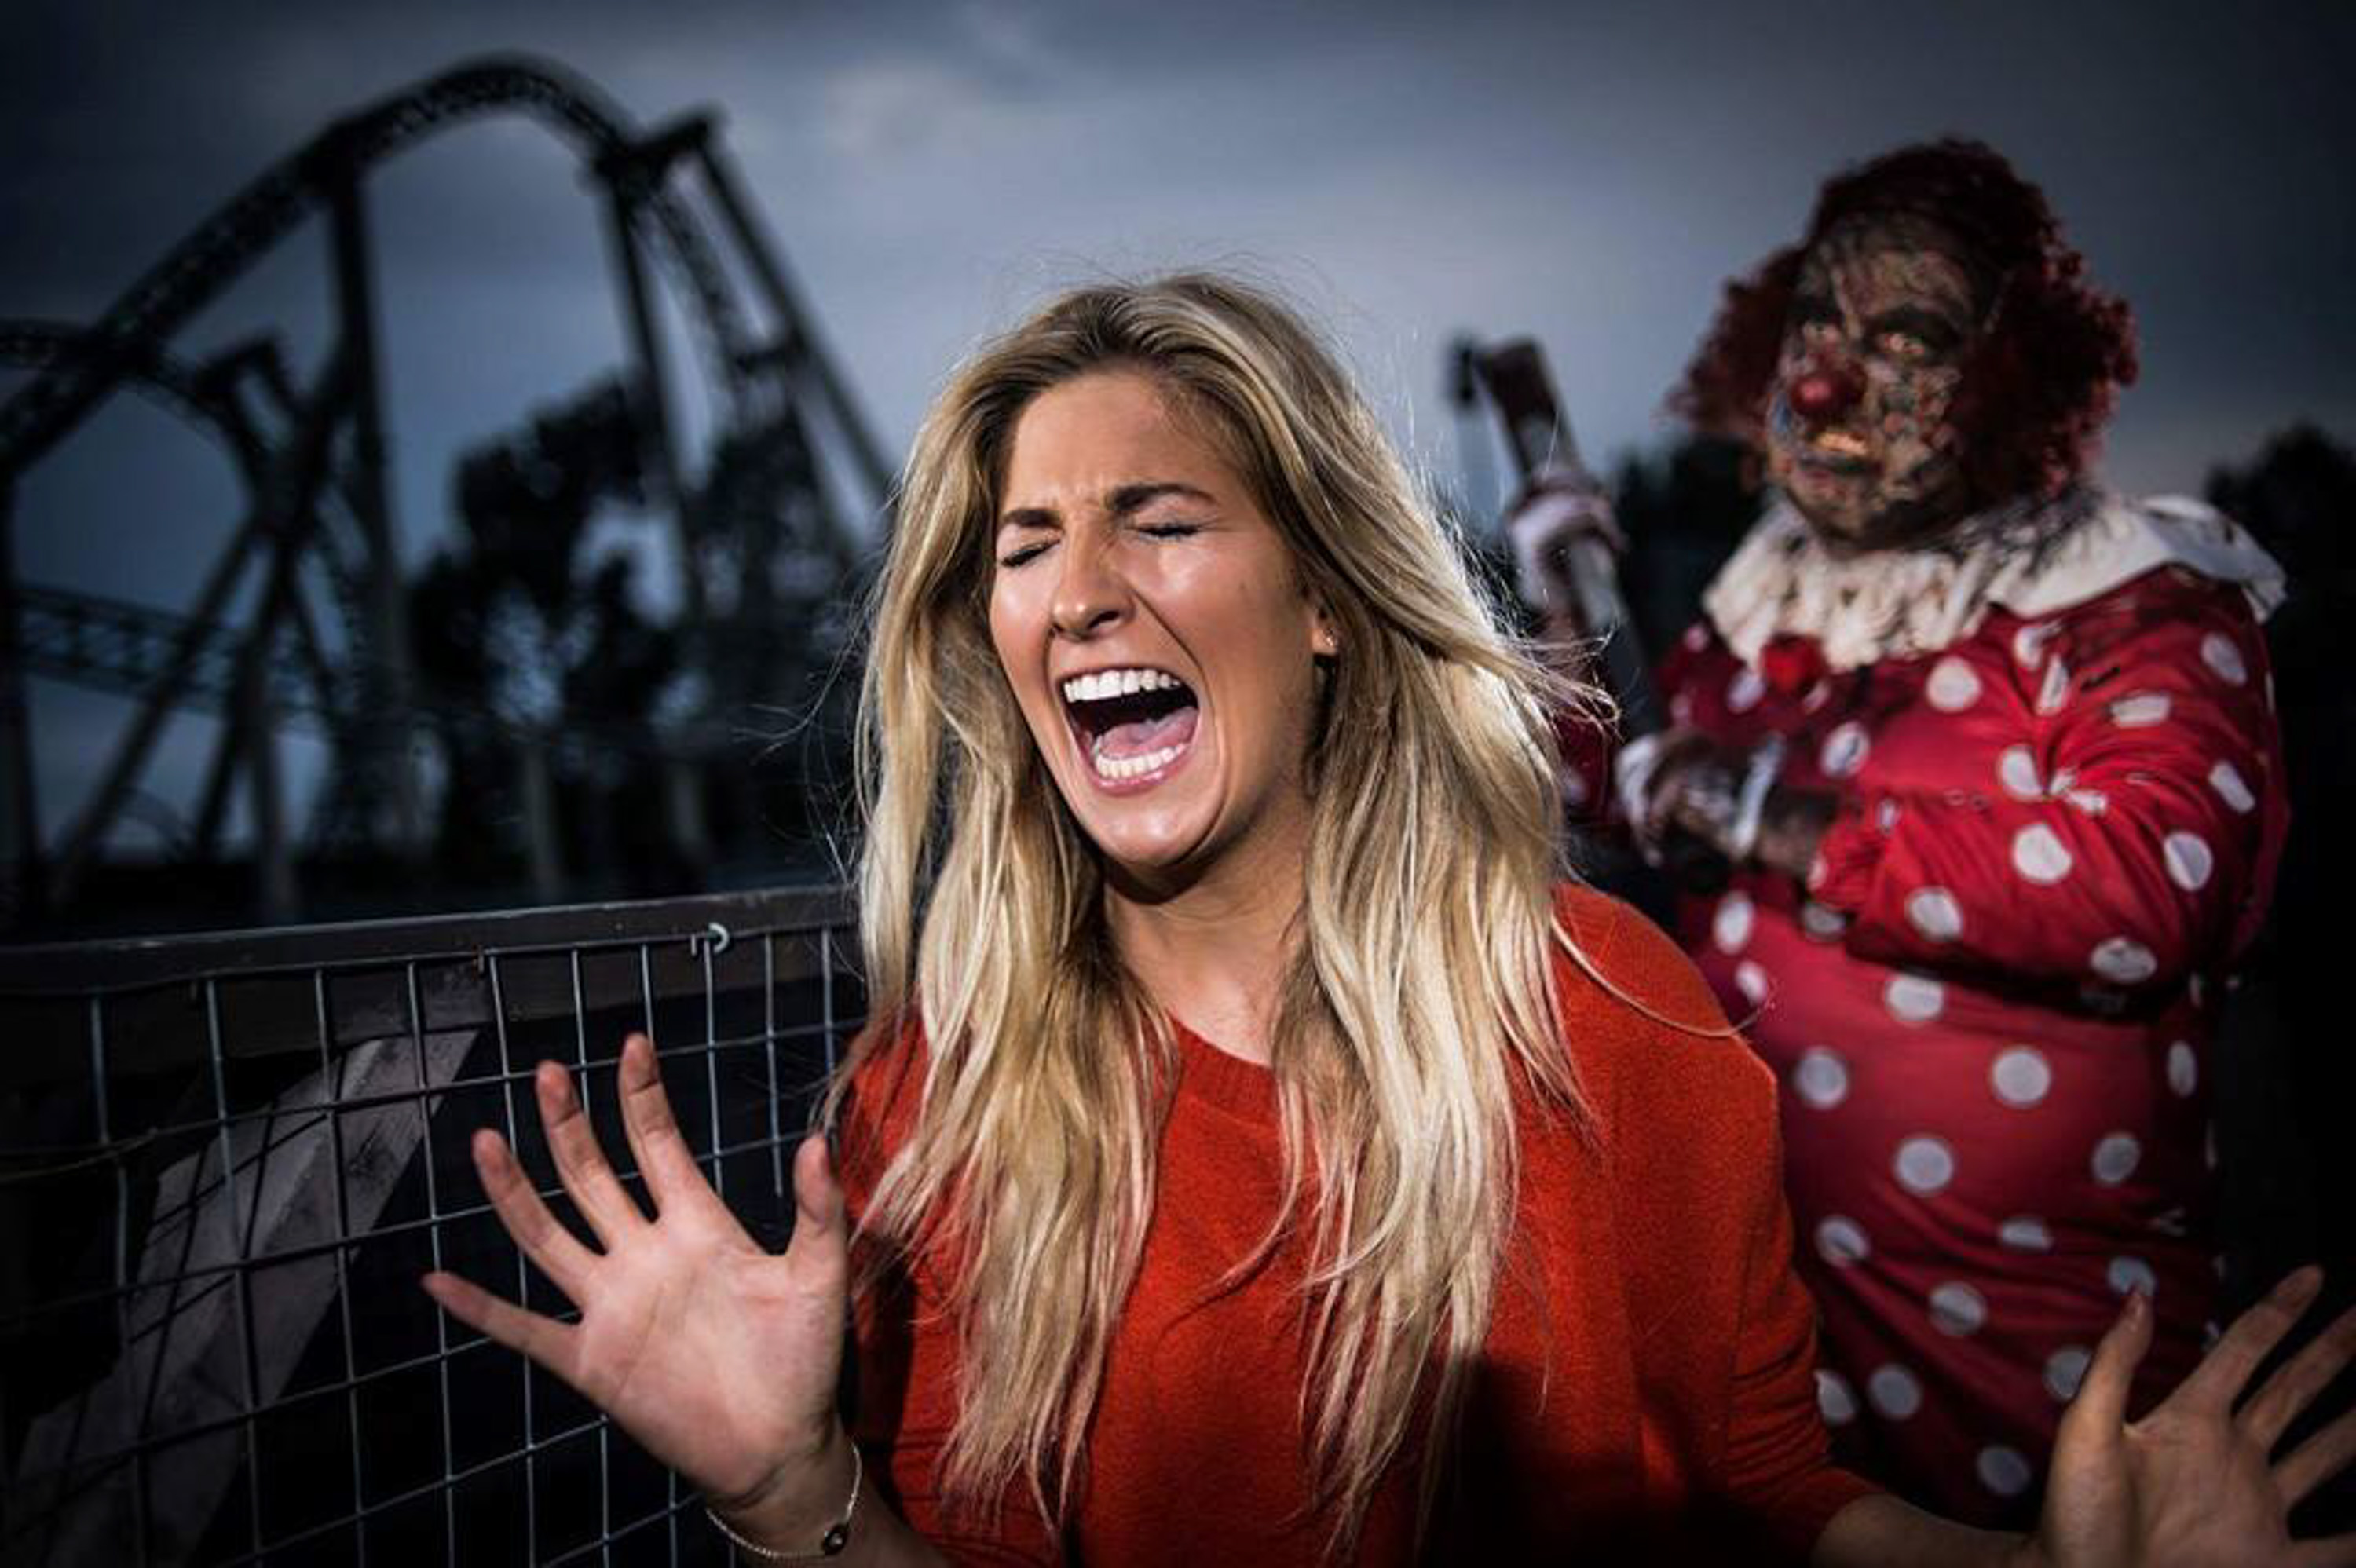 New Fright Nights 2015 The Big Top